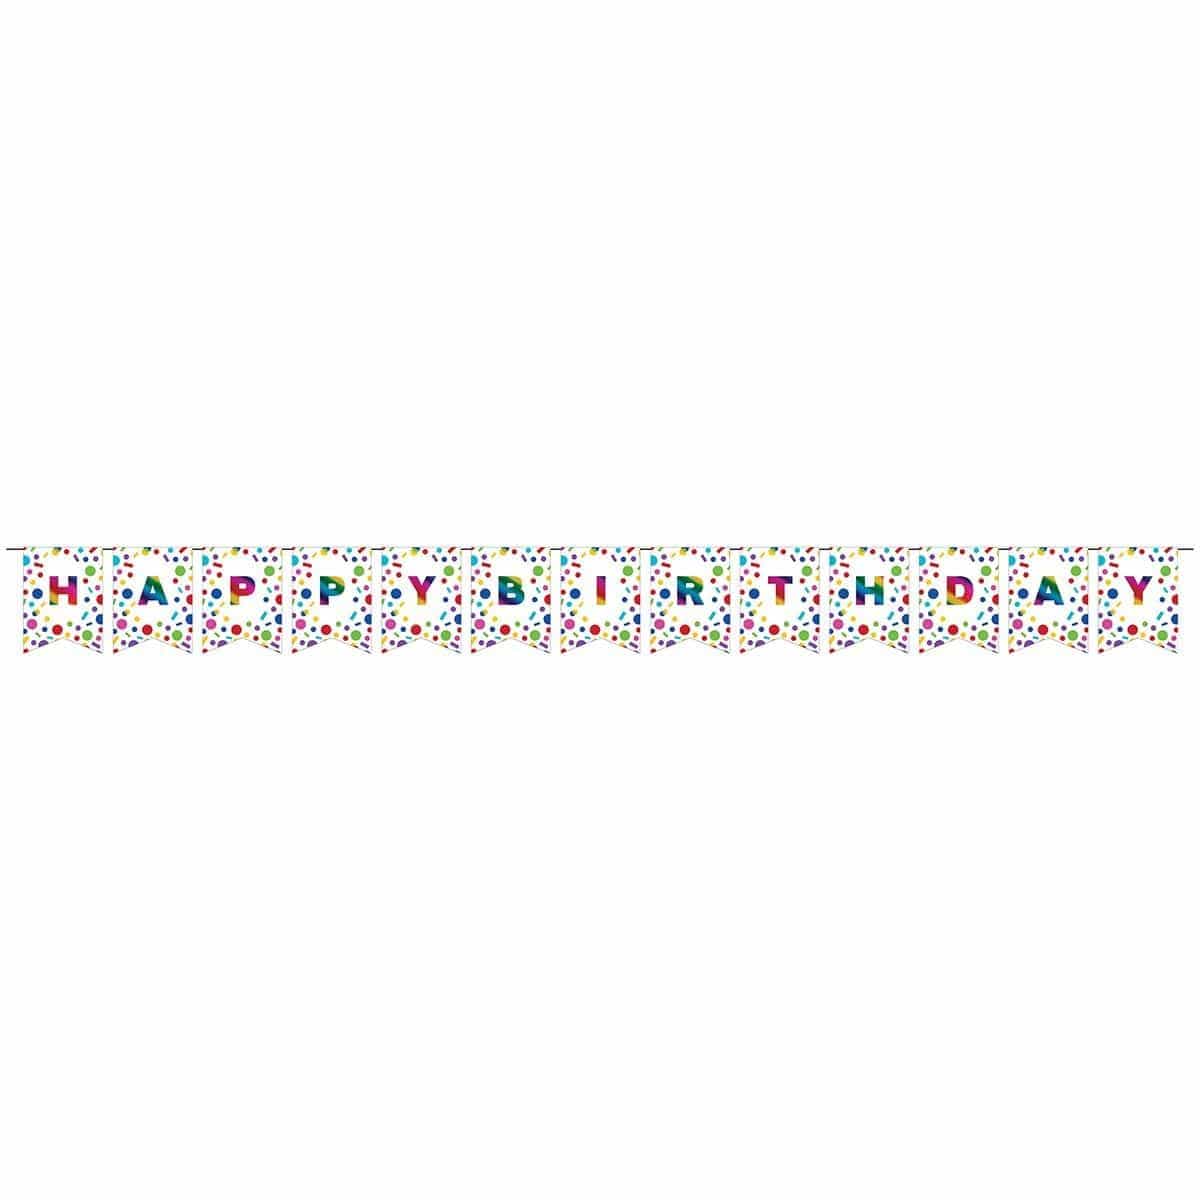 Buy General Birthday Rainbow Foil Birthday - Diy Pennant Banner sold at Party Expert